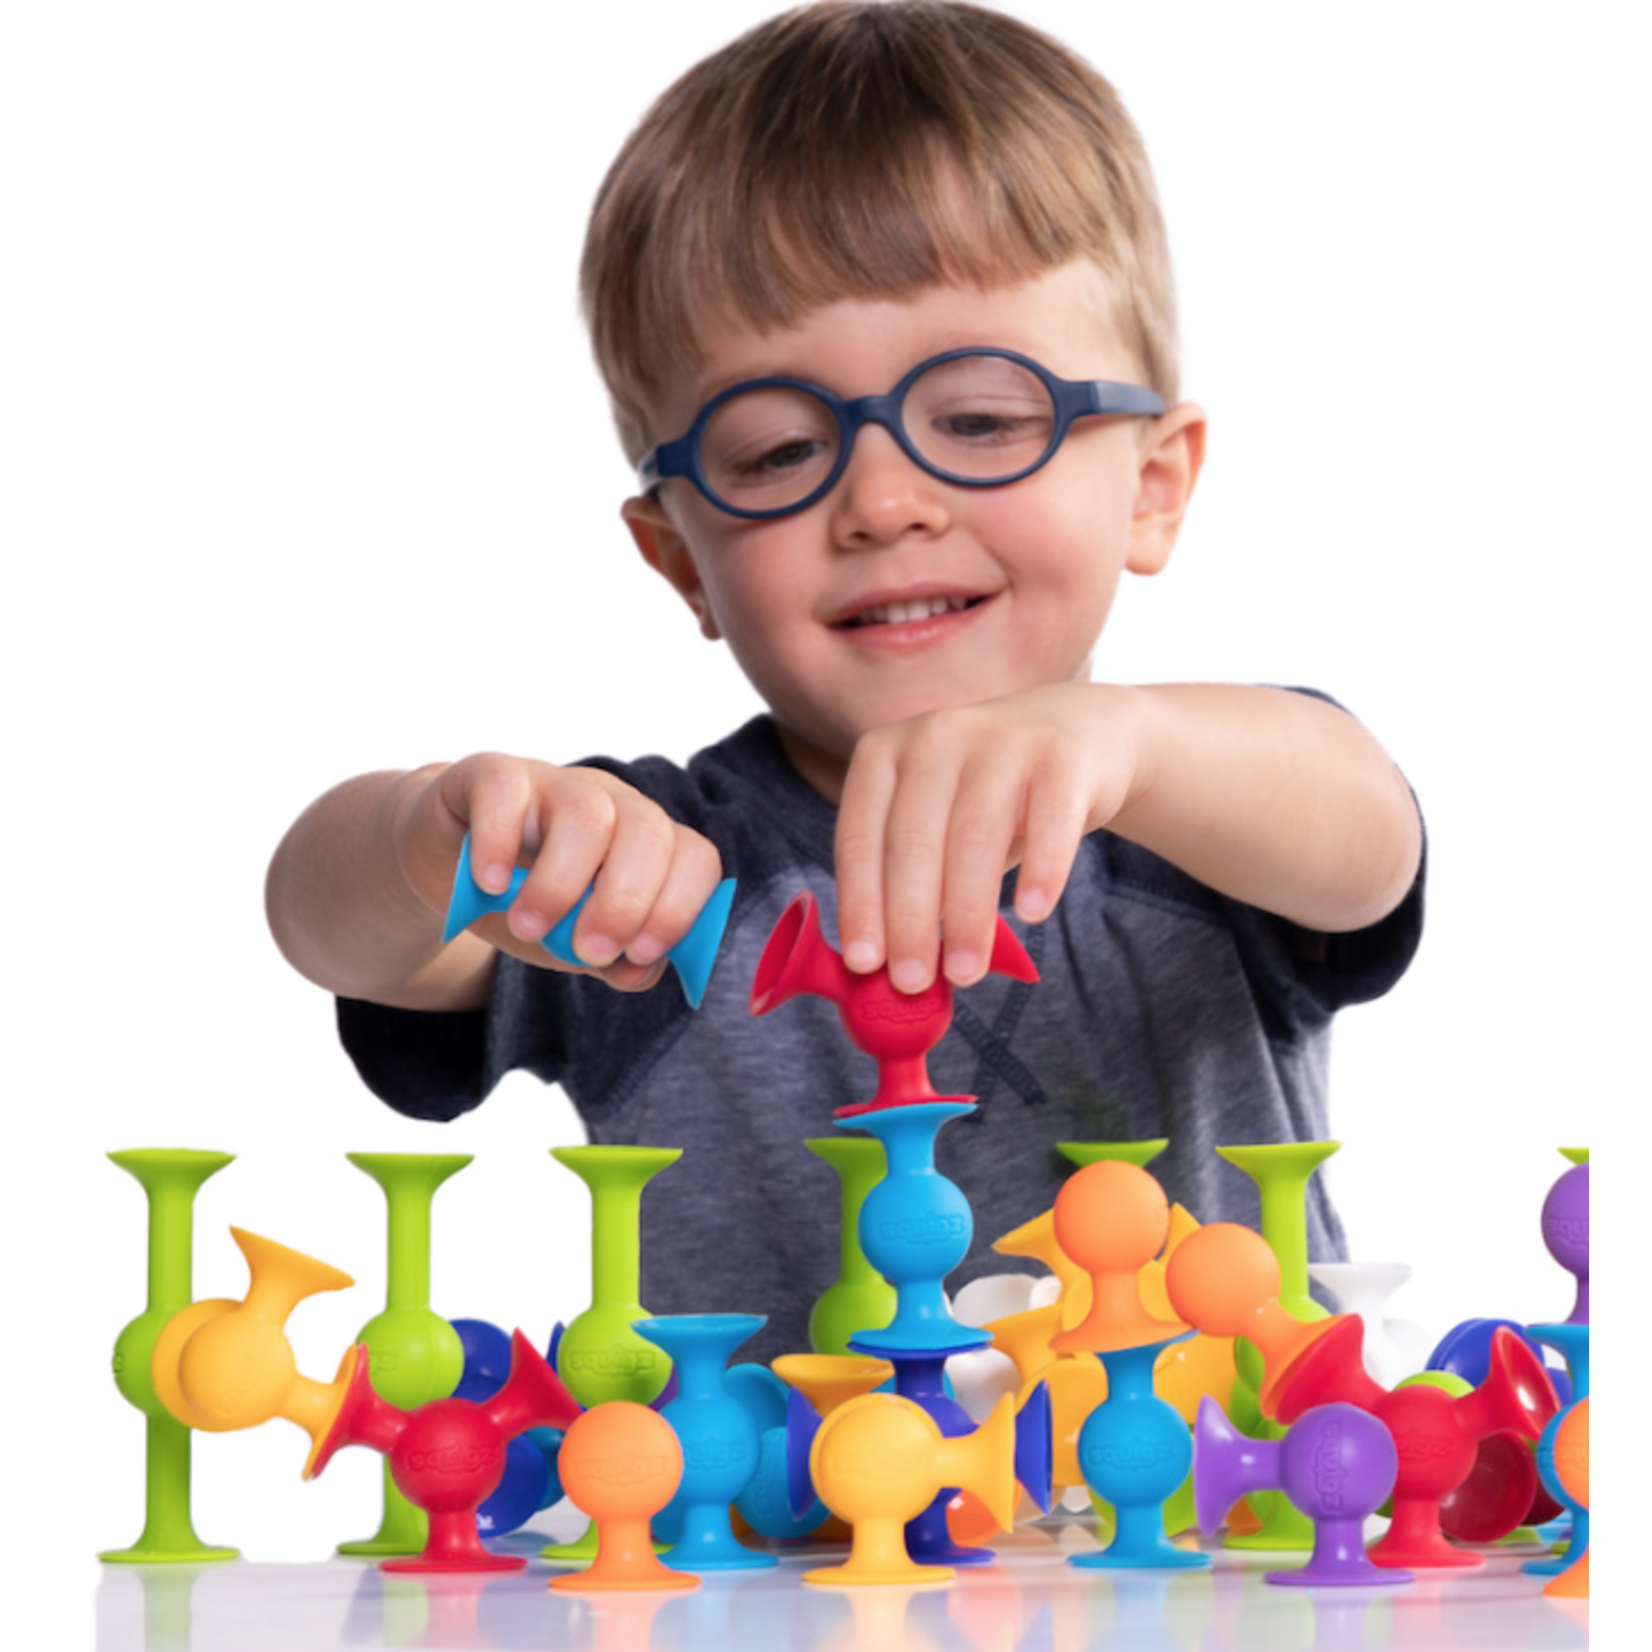 SQUIGZ TOY DELUXE SET - The Shoppes at Steve's Ace Home & Garden